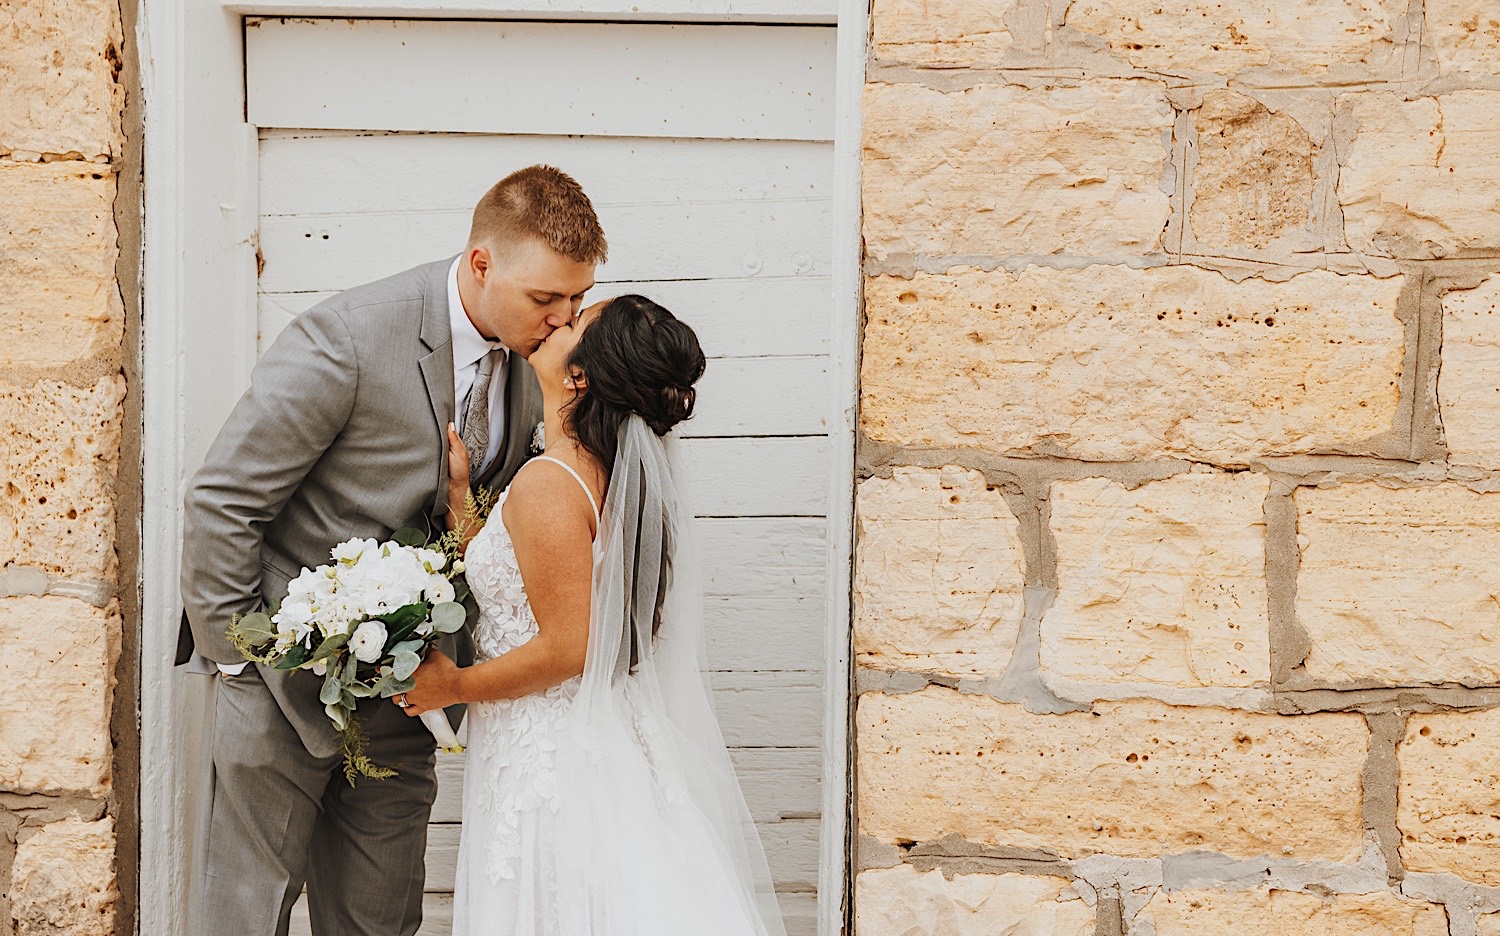 A bride and groom kiss in front of a white door on an old brick building, photo taken by a Minnesota Wedding Photographer